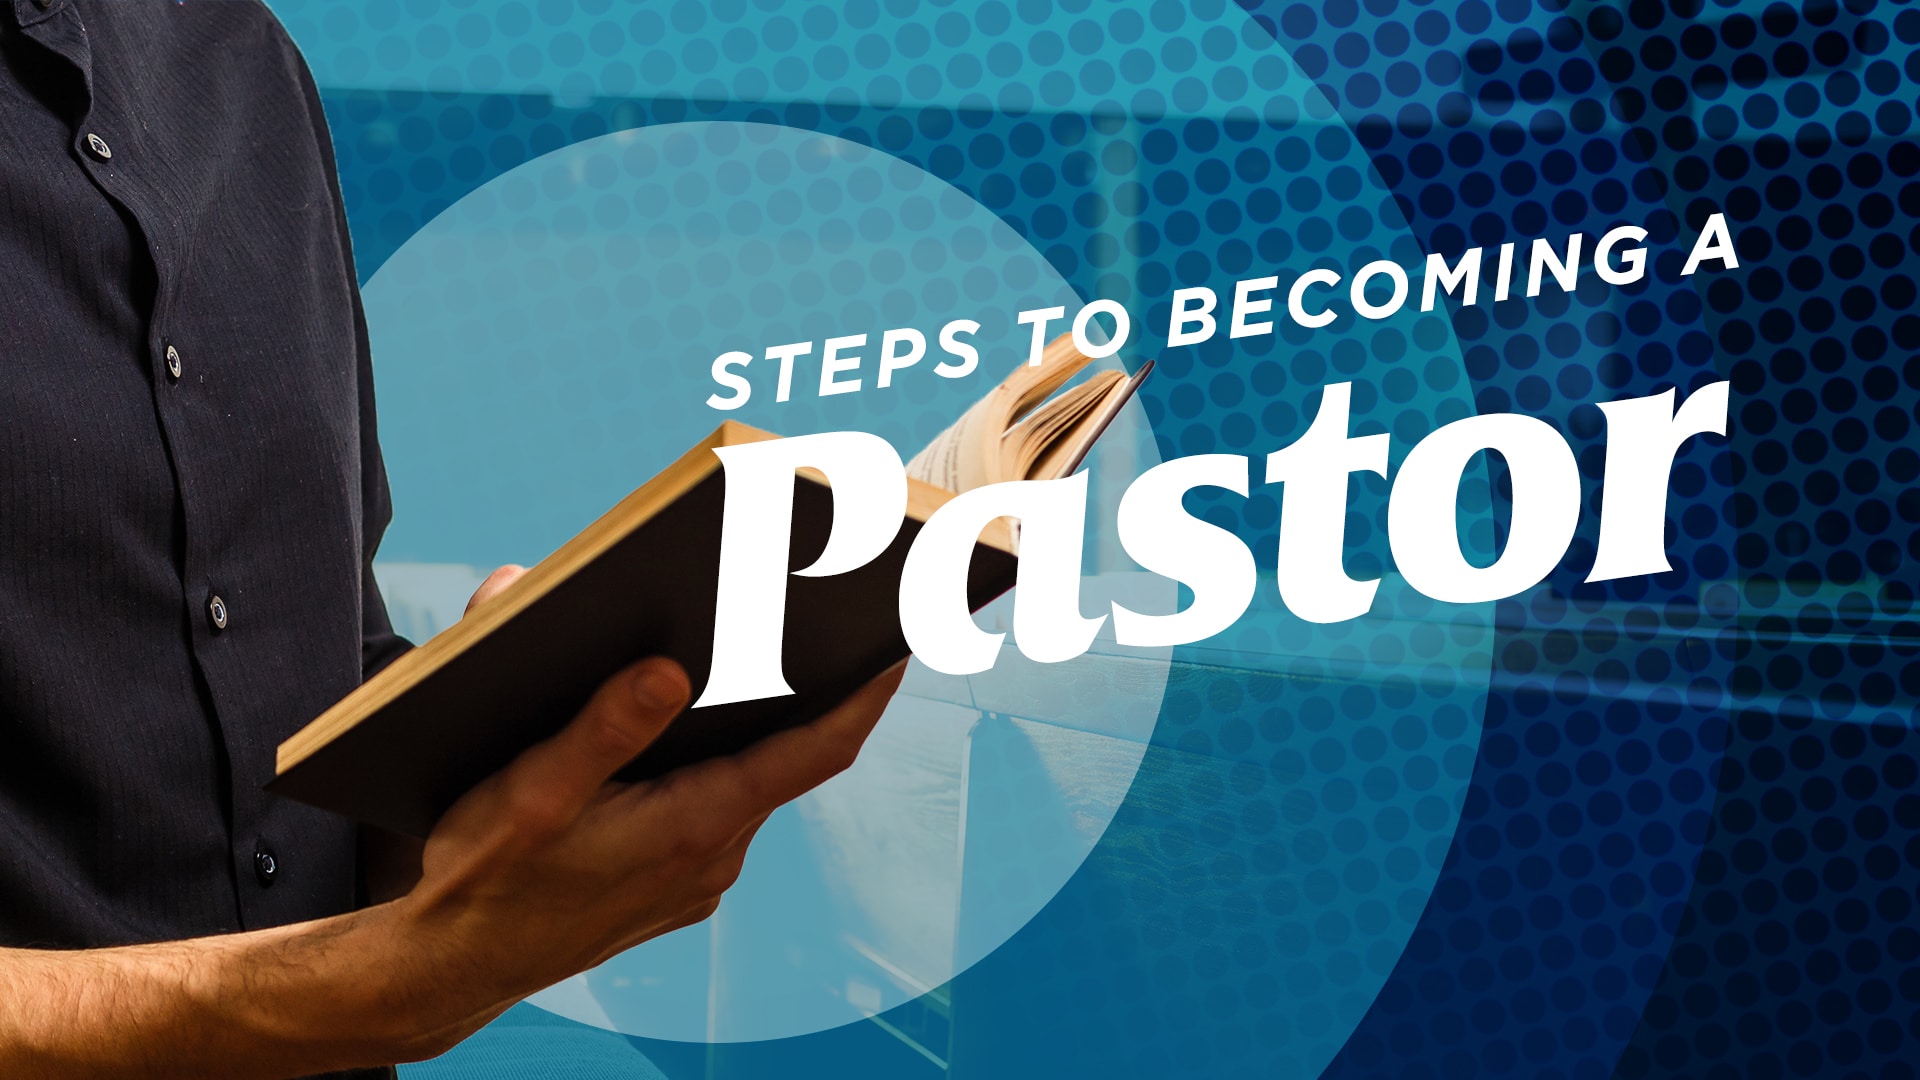 Steps to Becoming a Pastor